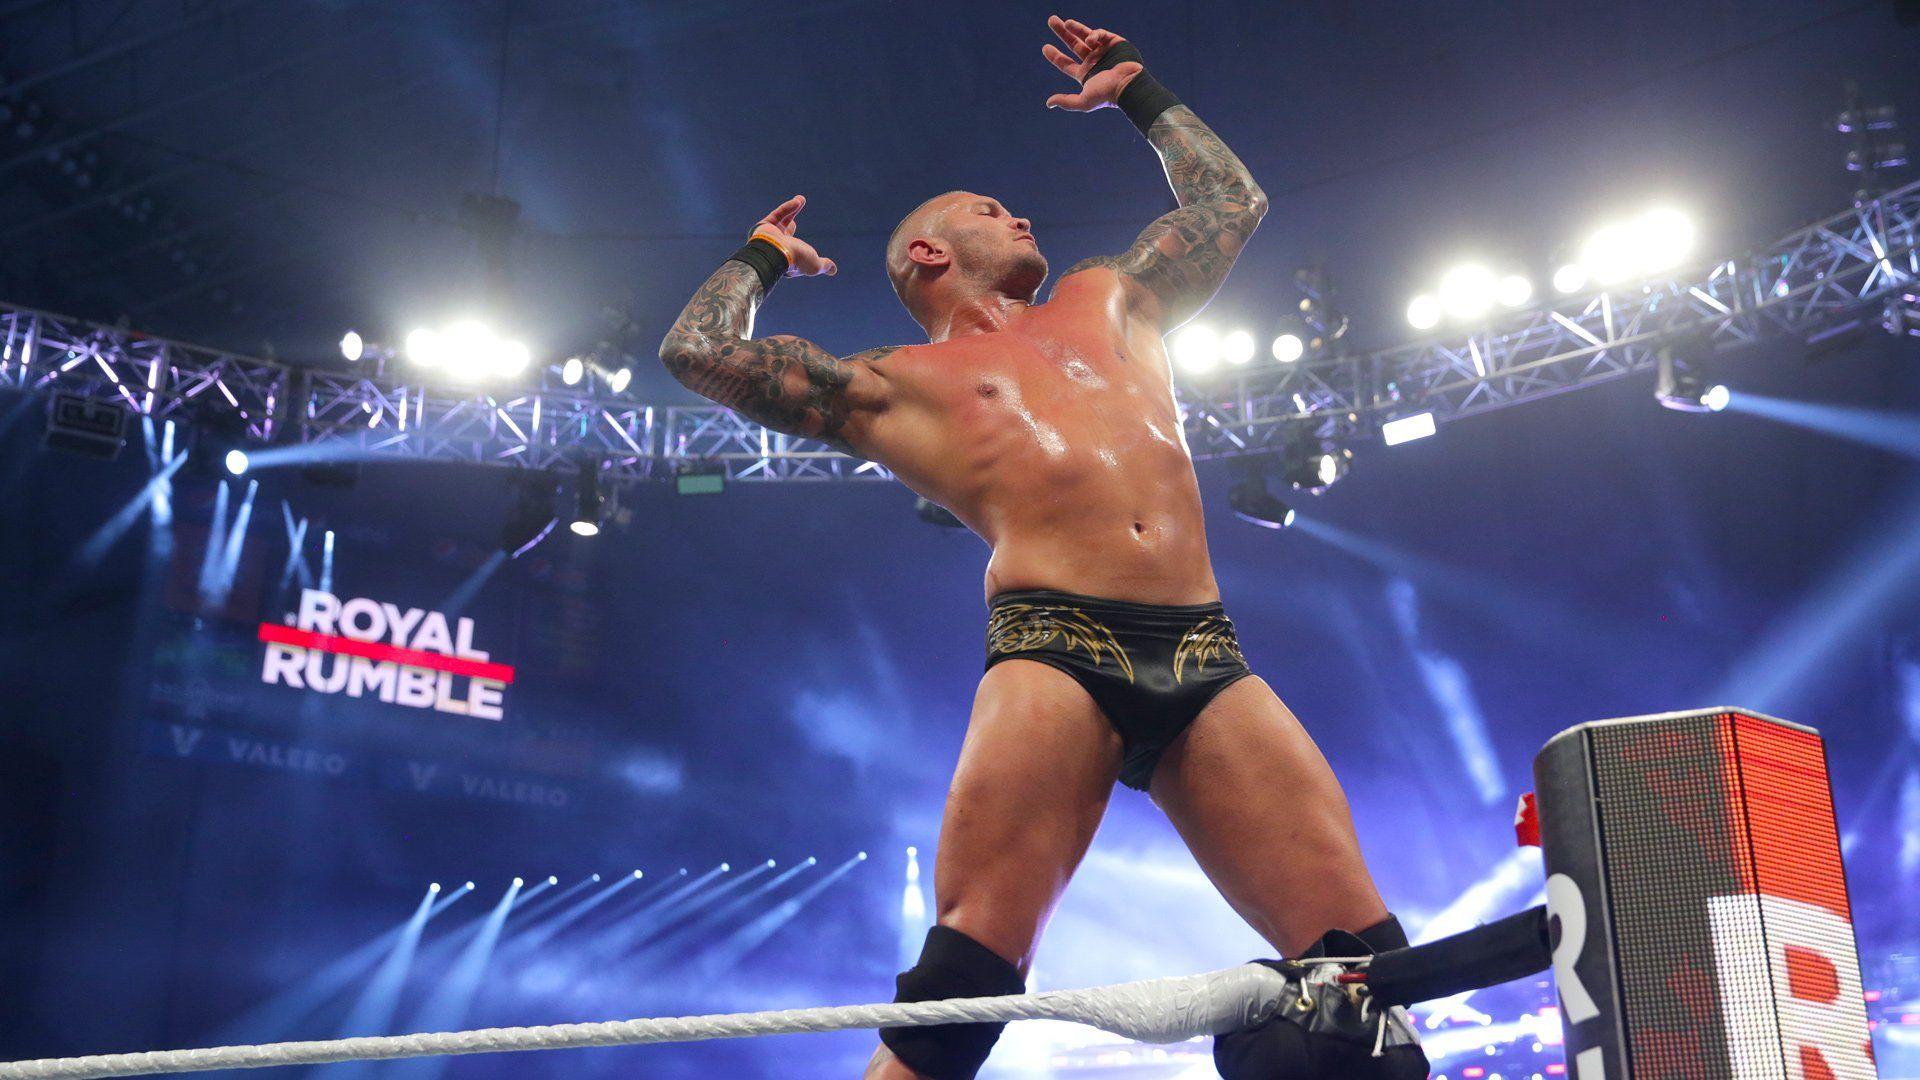 Royal Rumble. Latest News, Results, Photo, Videos and More